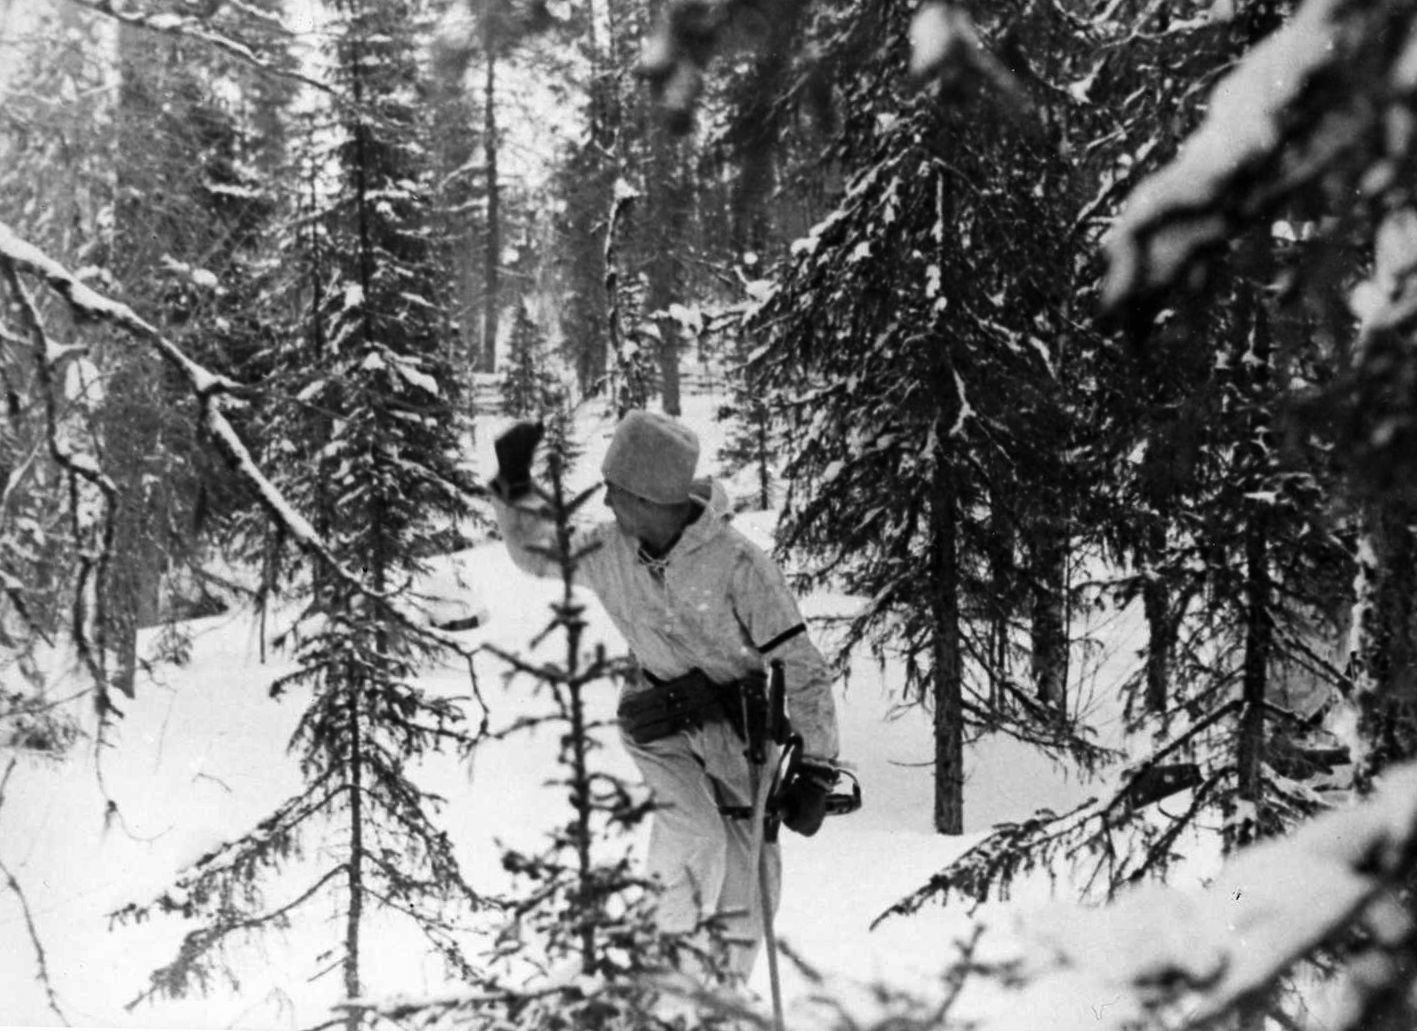 Motioning to his troops to follow quickly, a German soldier leads a detachment through a wooded area of Russia. The winter weather took a heavy toll on the unprepared Germans.